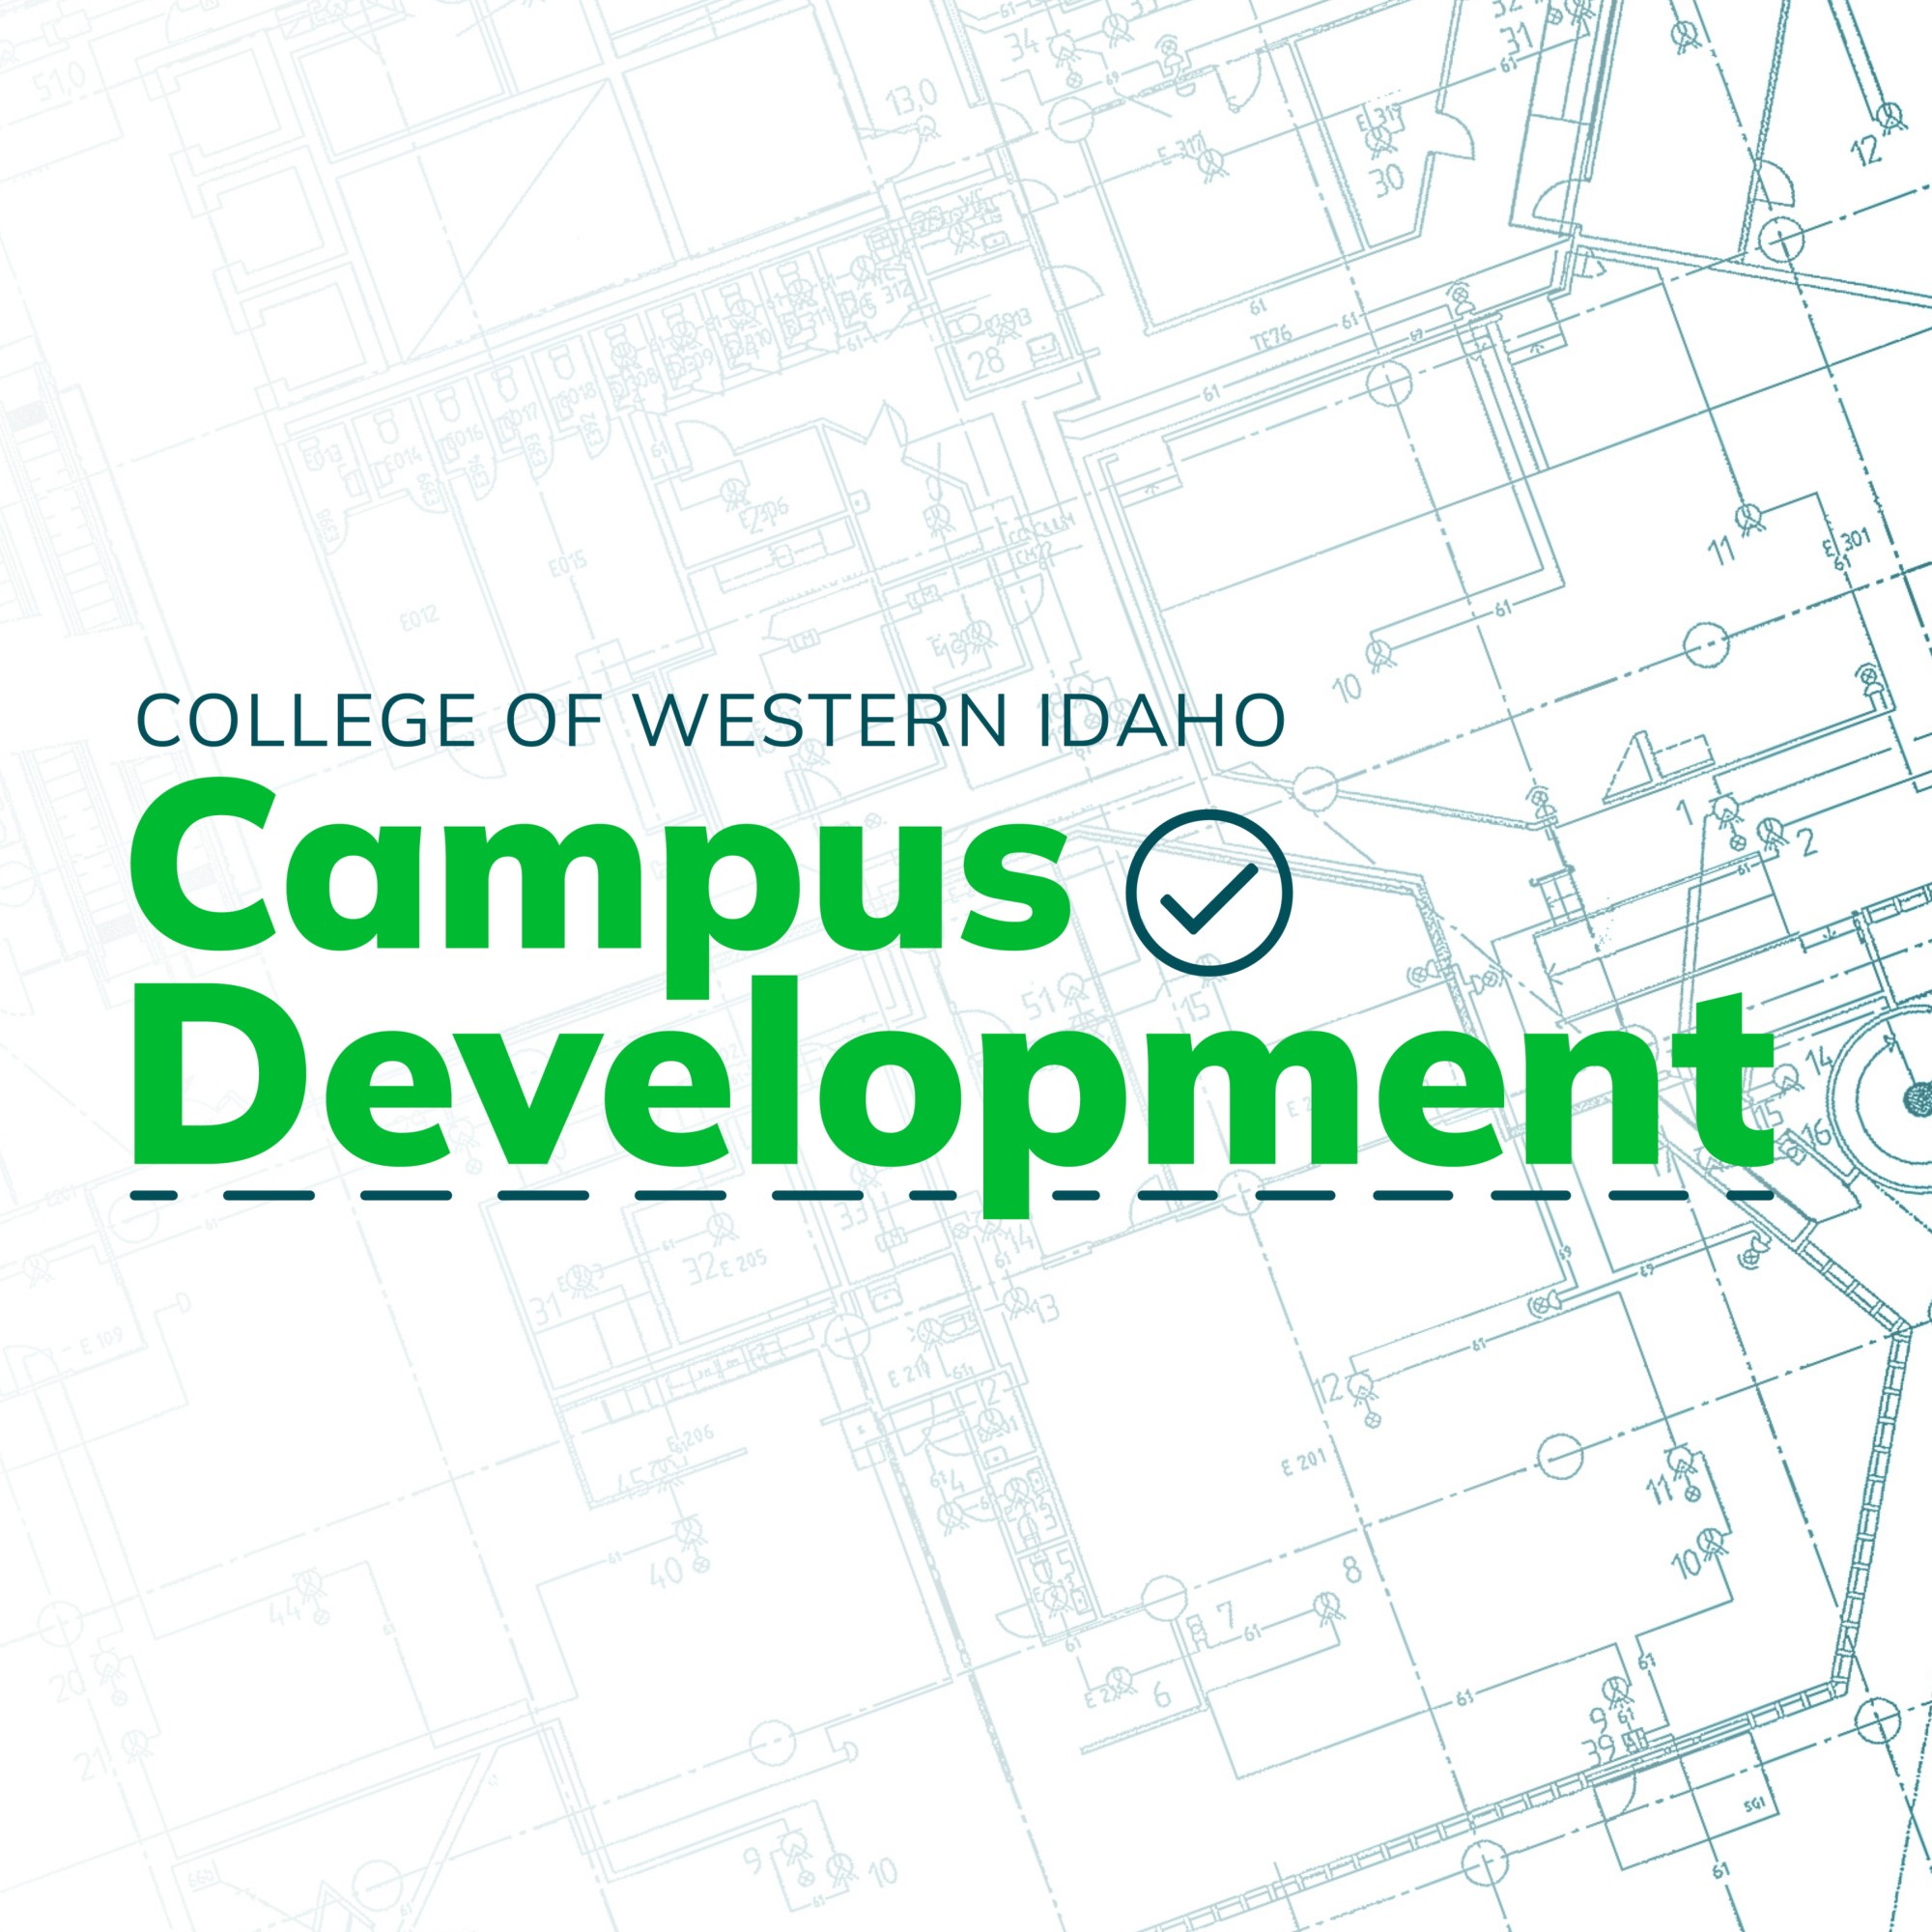 College of Western Idaho expands in Nampa.